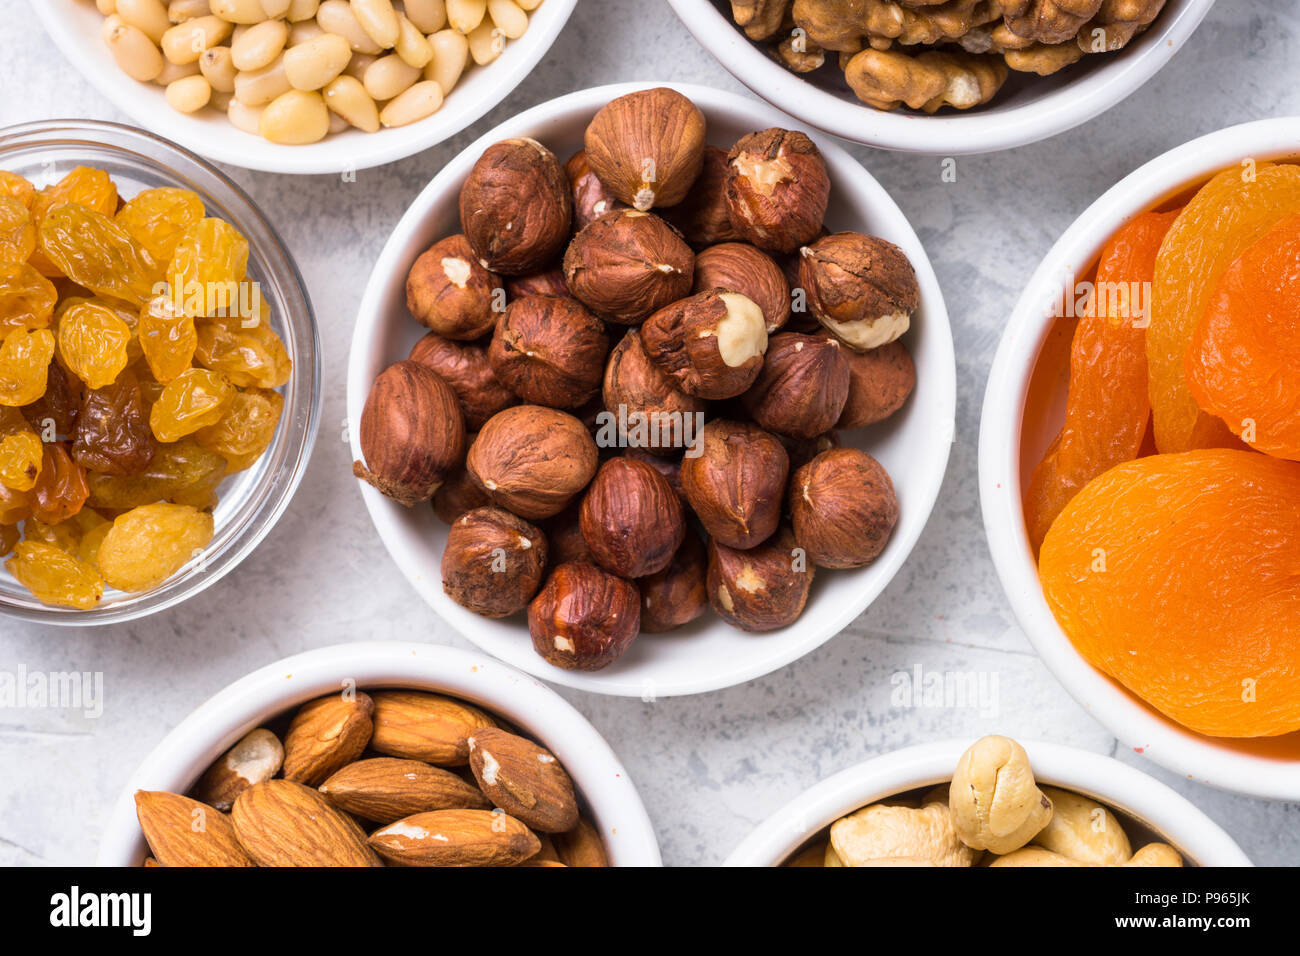 Assortment of nuts and dried fruits in bowls. Cashew, hazelnuts, walnuts, almonds, brazilian nuts, raisins, dried apricots and pine nuts. Top view wit Stock Photo